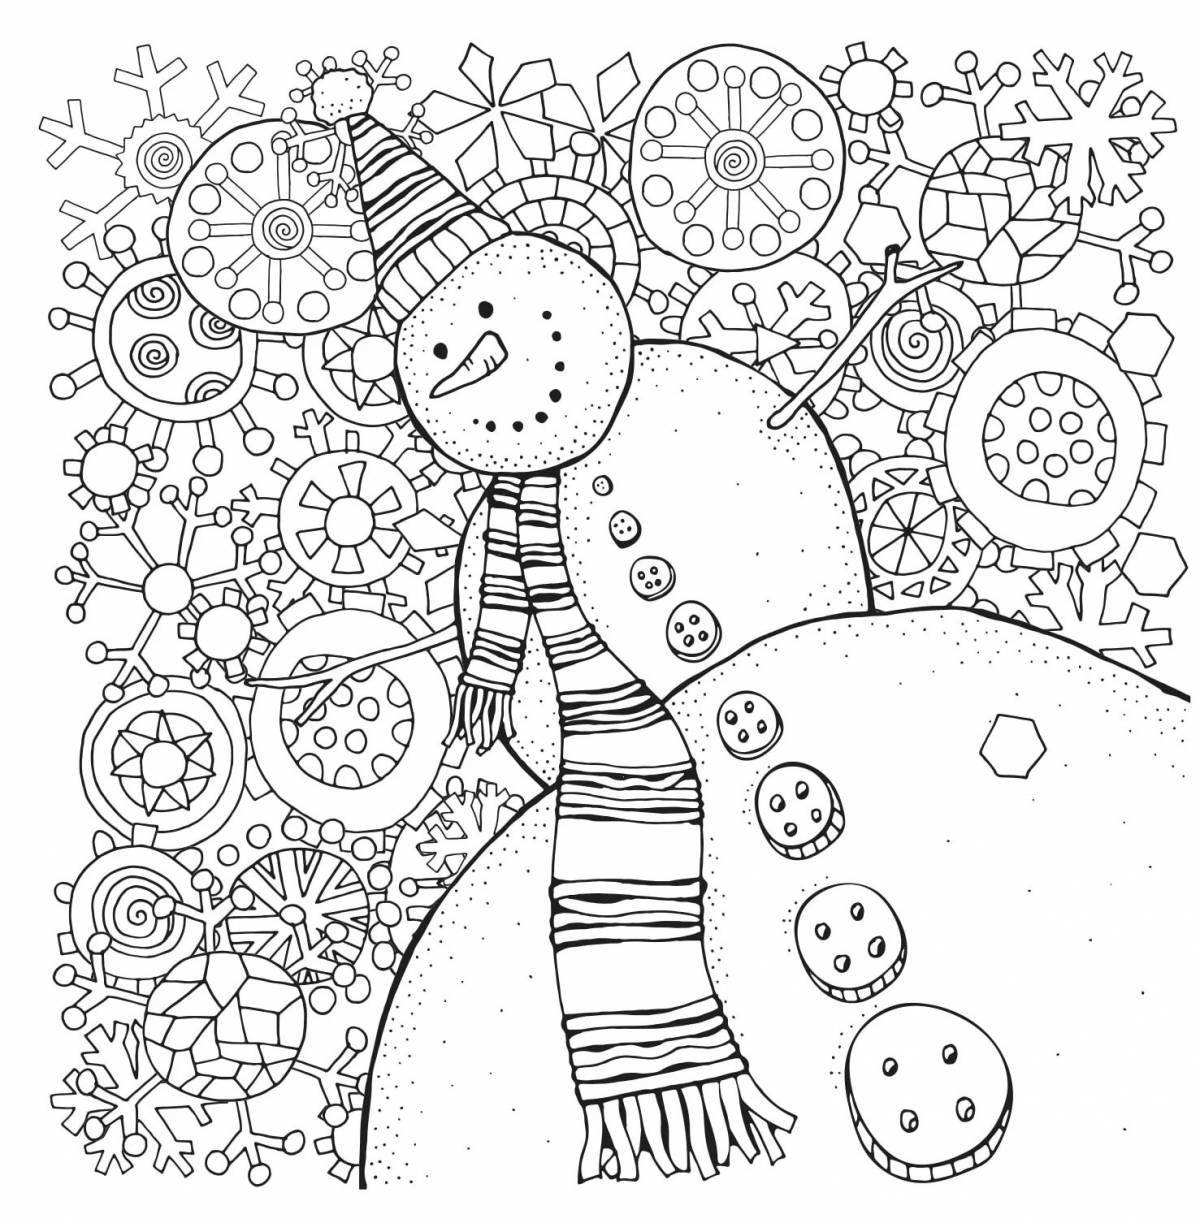 Giggly snowman antistress coloring page